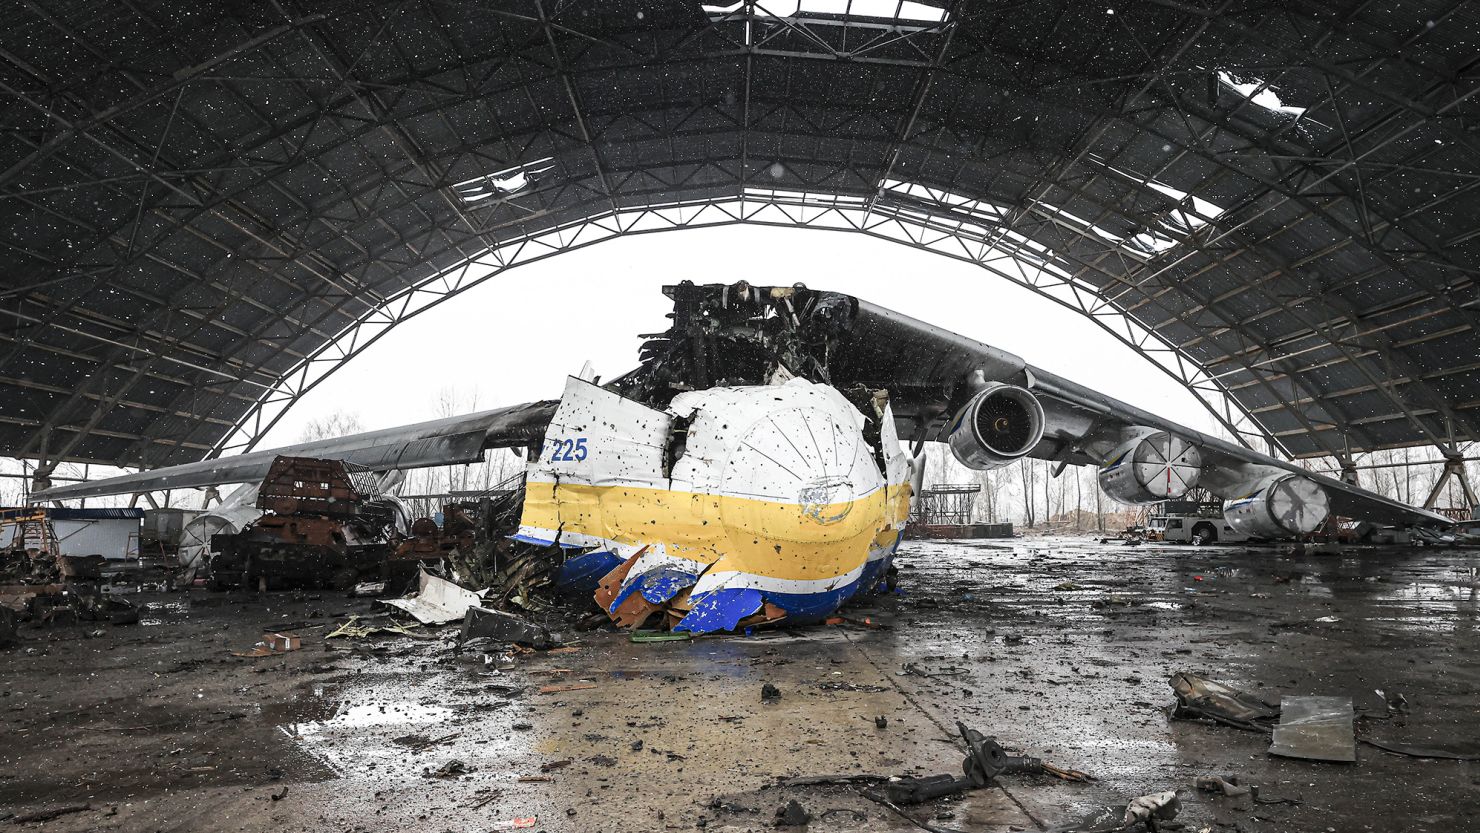 The AN-225 was destroyed in the early stages of the Russian invasion of Ukraine.